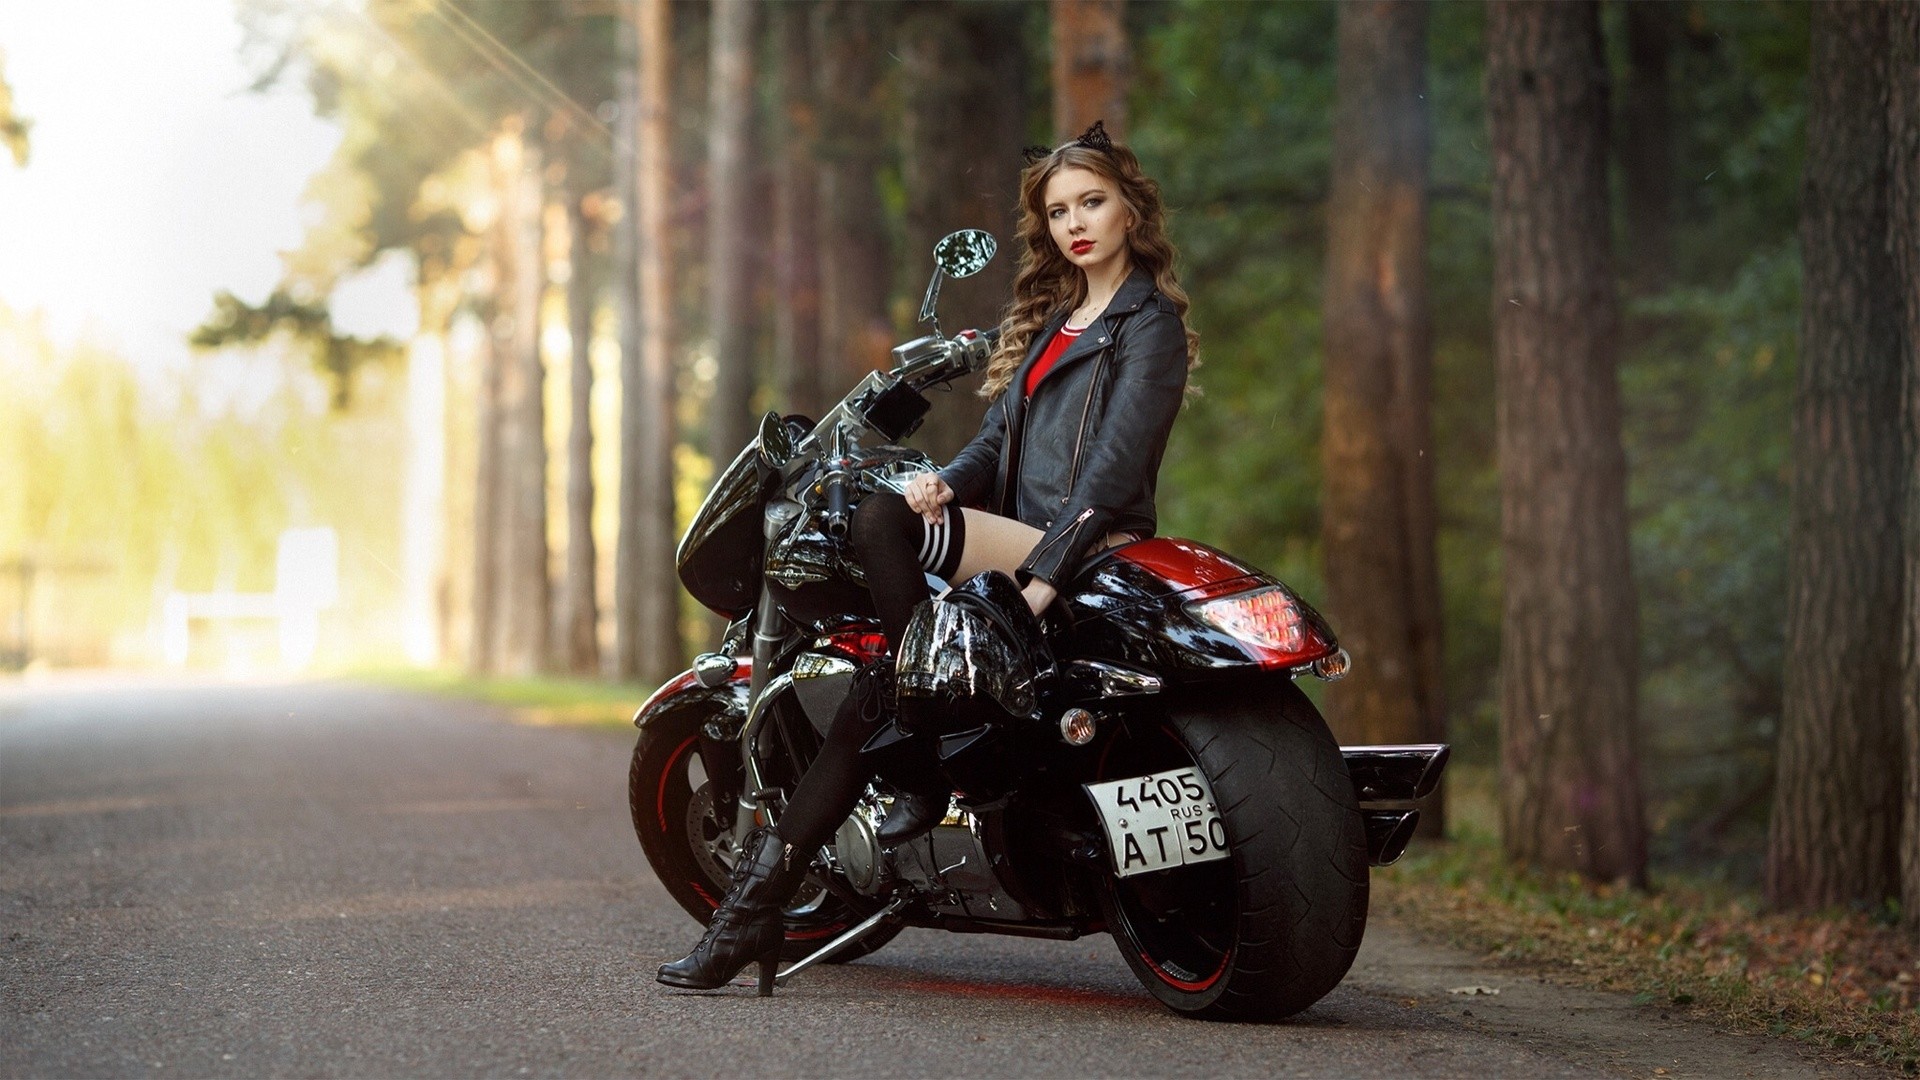 1920x1080 4K Girl On A Motorcycle Wallpaper HQ#1